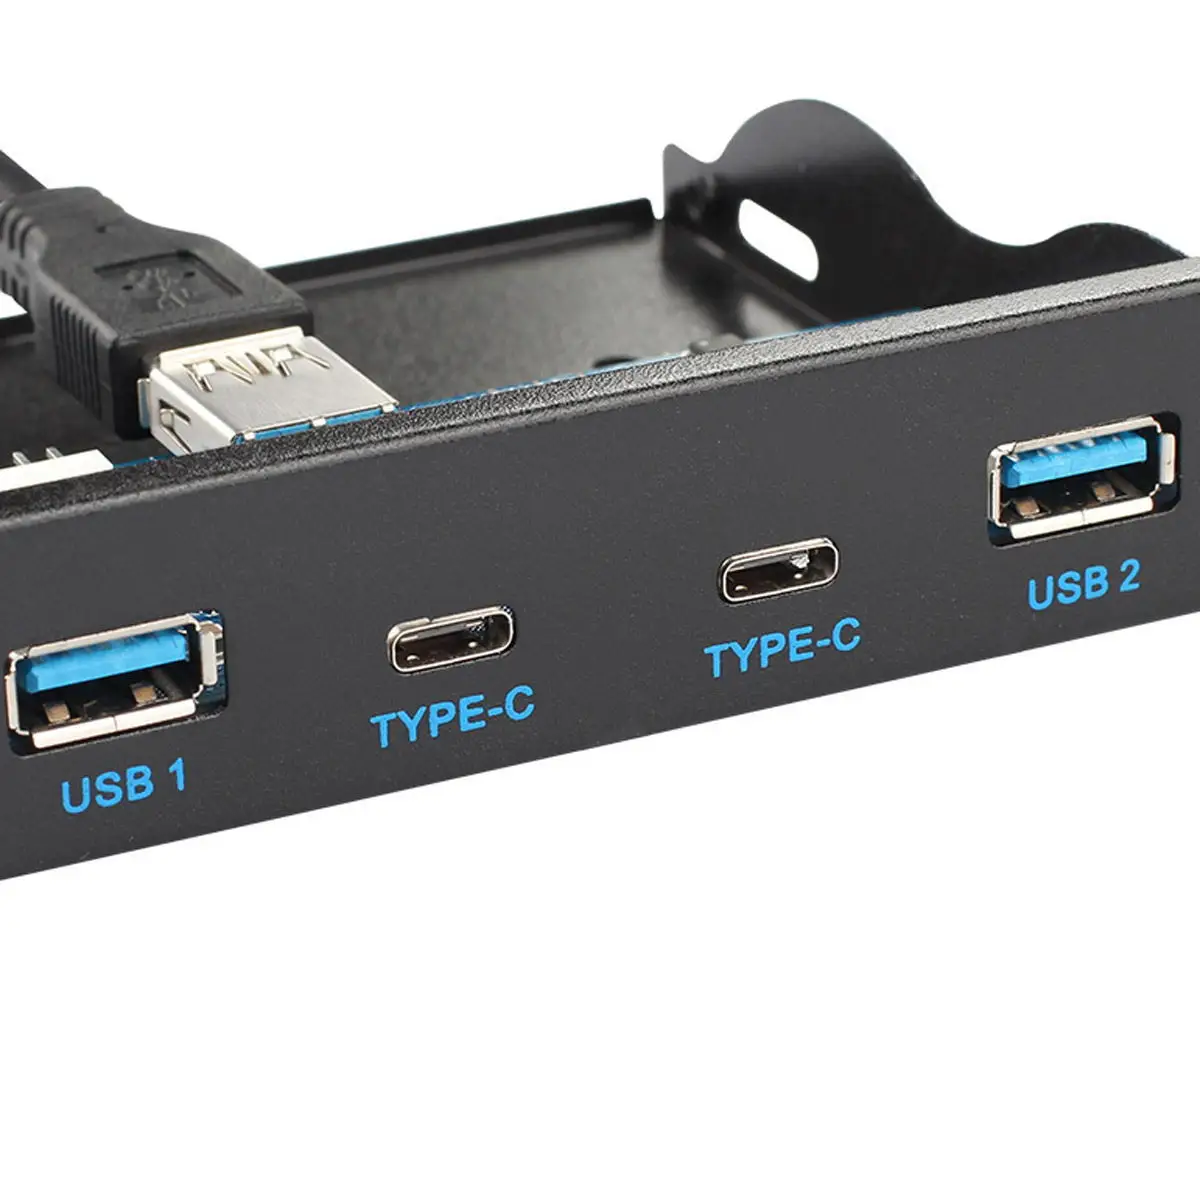 

CYSM Chenyang USB 3.1 Front Panel Header to USB-C & USB 3.0 HUB 4 Ports Front Panel Motherboard Cable for 3.5" Floppy Bay